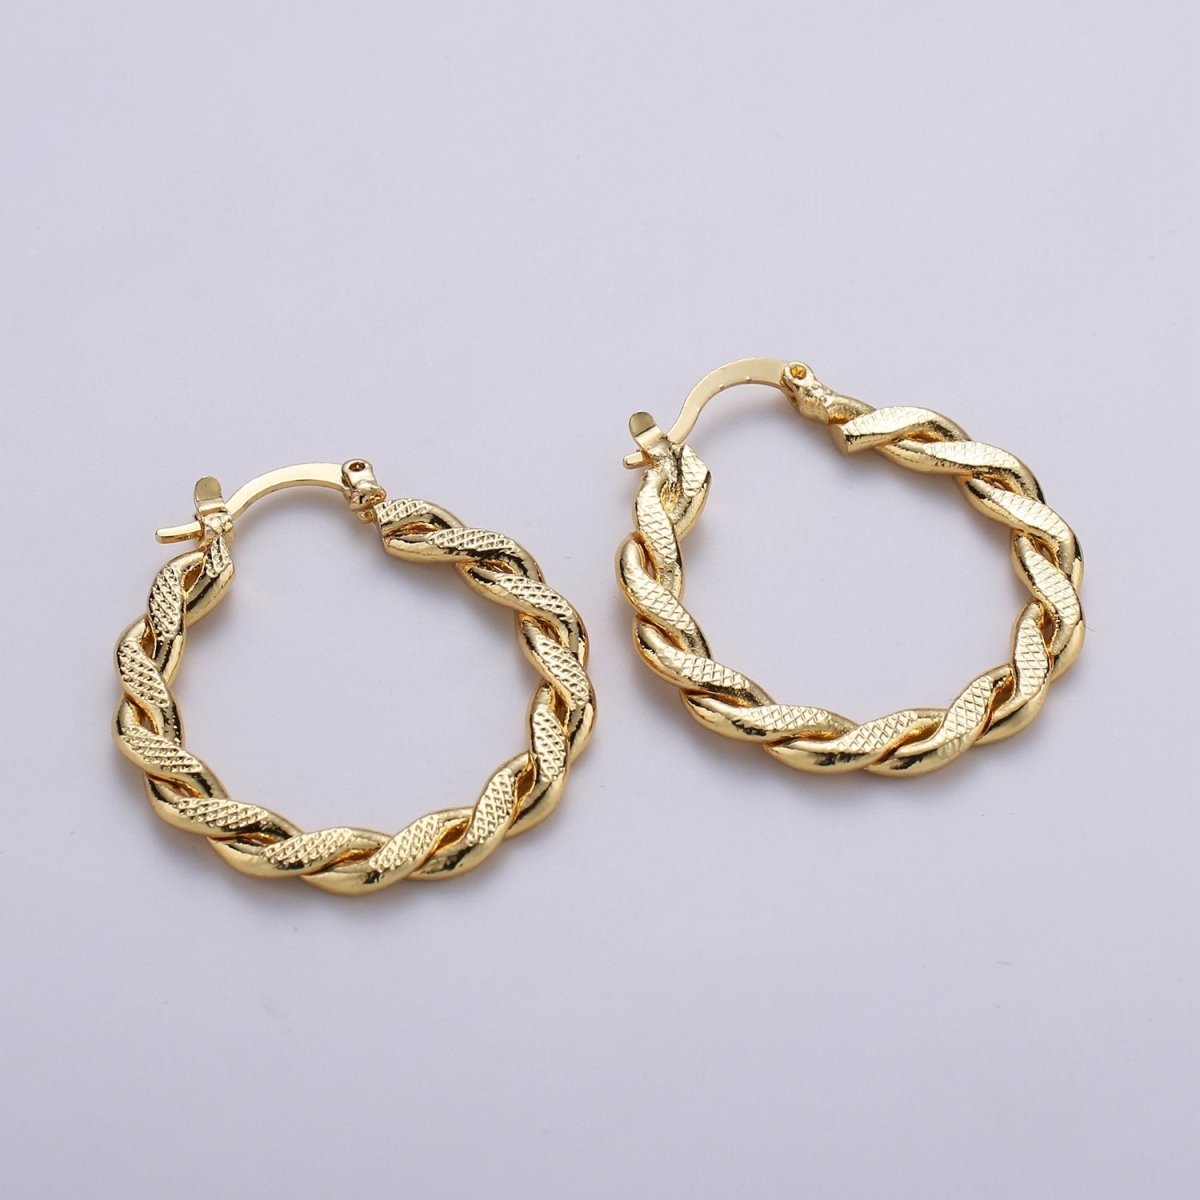 Bold Twisted Hoops in Gold • Minimalist Earrings • Modern Thick Hoops • Perfect Gift for Her Statement Hoops Earring in Vermeil 30mm Hoops Q-237 - DLUXCA